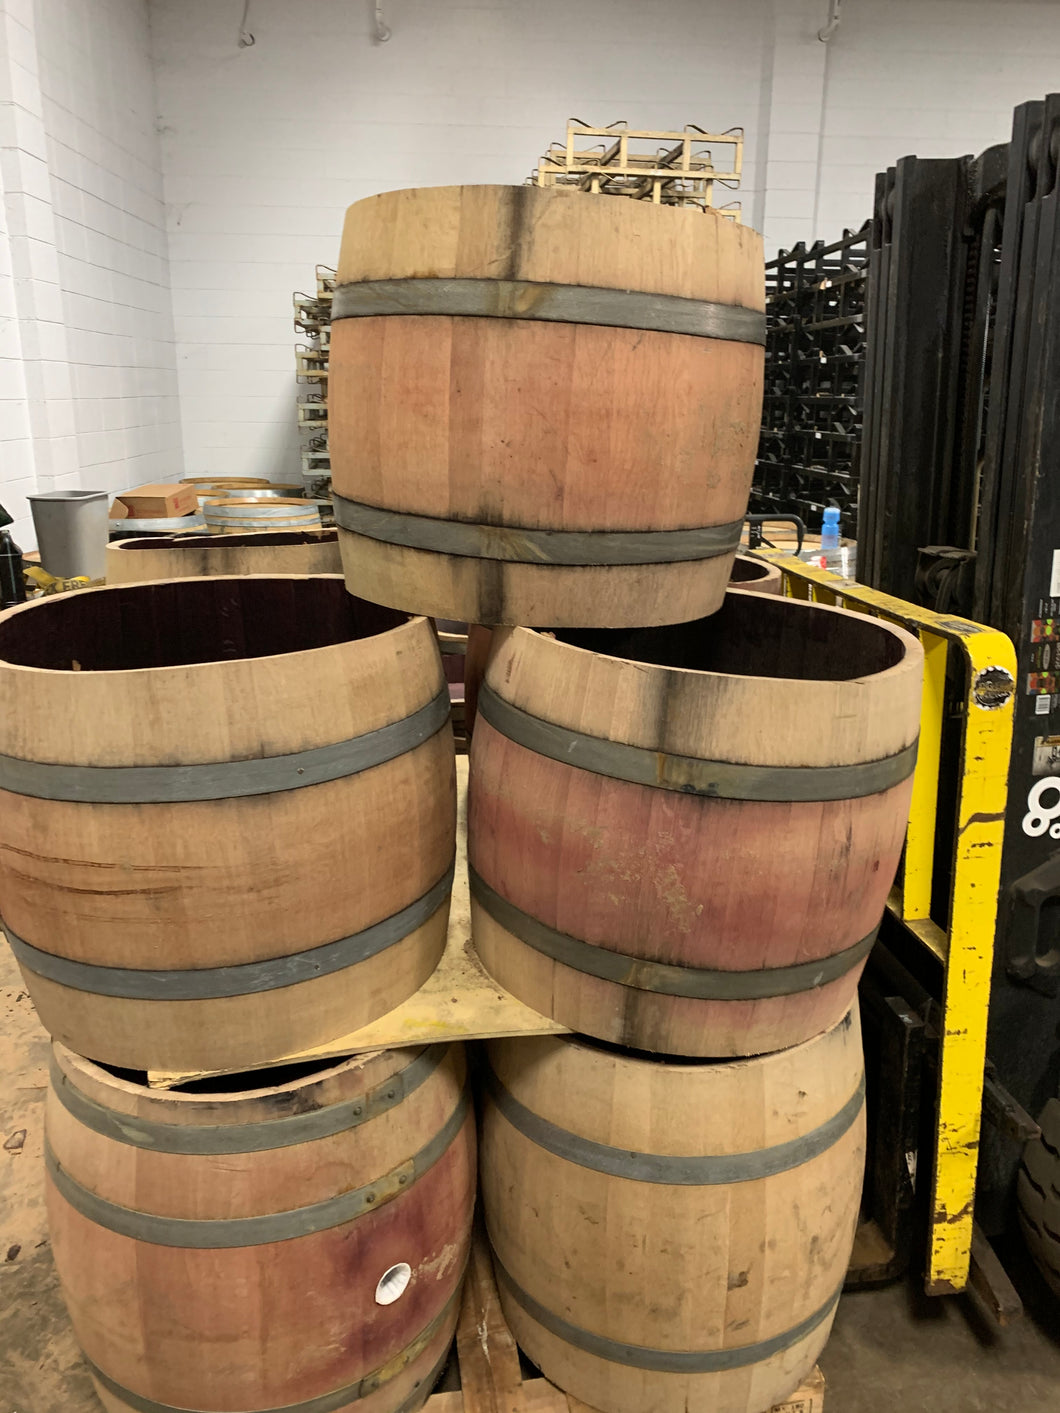 SALE 59g white Wine Barrel Cylinder. 9 in tall 27in dia & 20 lbs